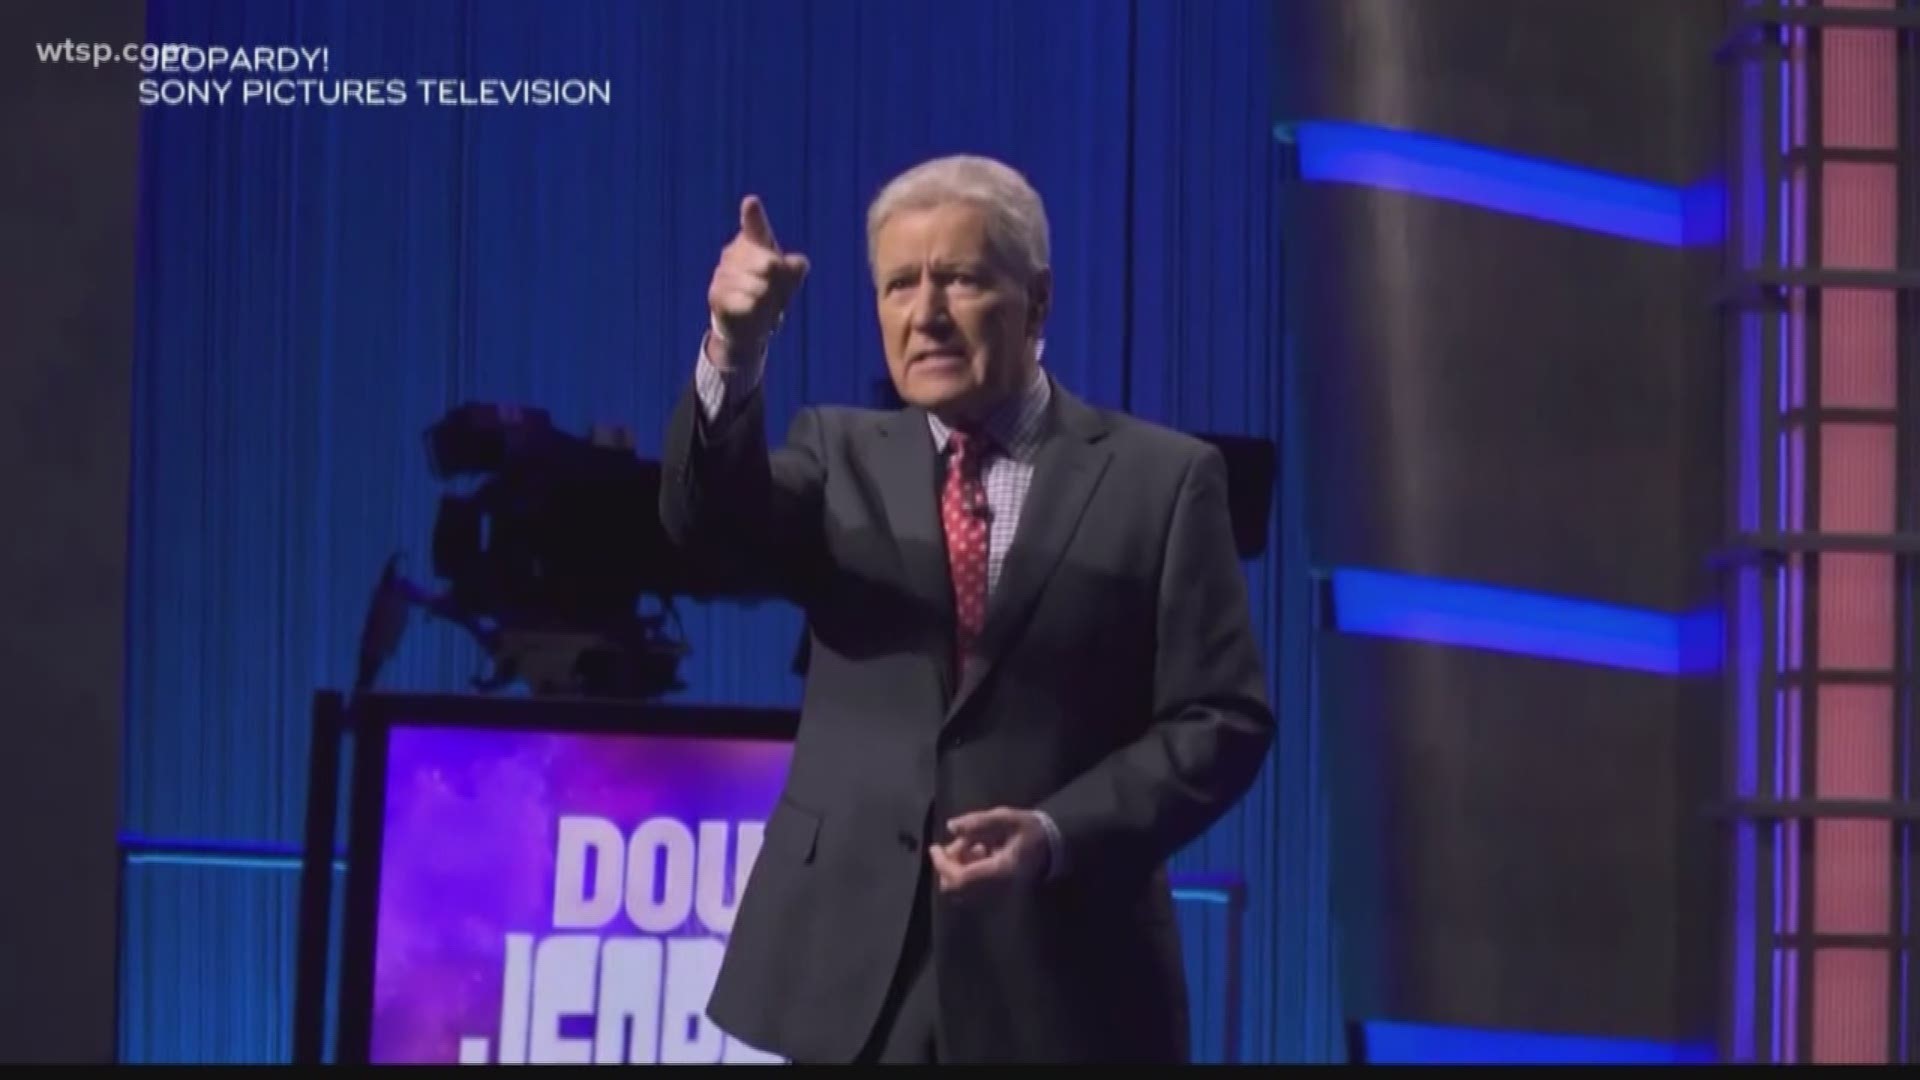 Just weeks after announcing he was on the mend following a pancreatic cancer diagnosis, beloved "Jeopardy!" host Alex Trebek says he will undergo chemotherapy again.

“The reason it's such a deadly killer is because it doesn't go away like other cancers,” says Danny Rowland of Tarpon Springs, who speaks from experience.